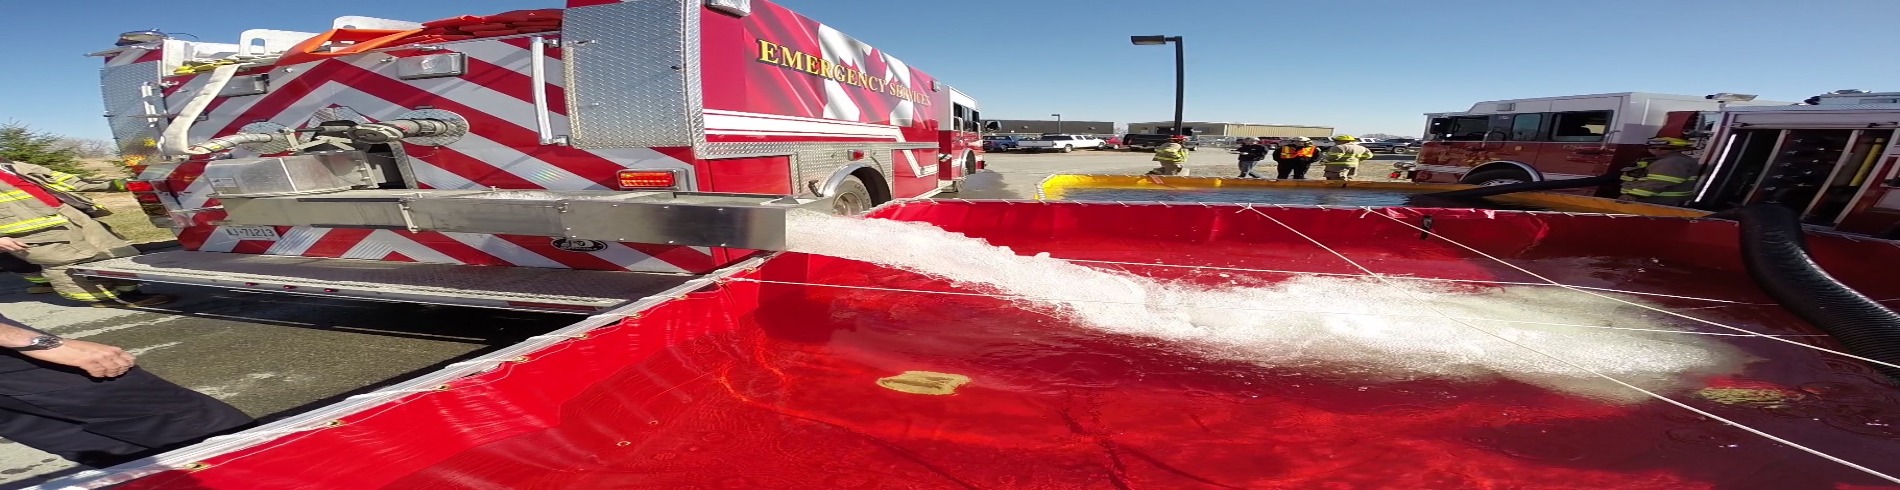 Fire fighters fill portable tanks with water as part of the Tanker Shuttle Service